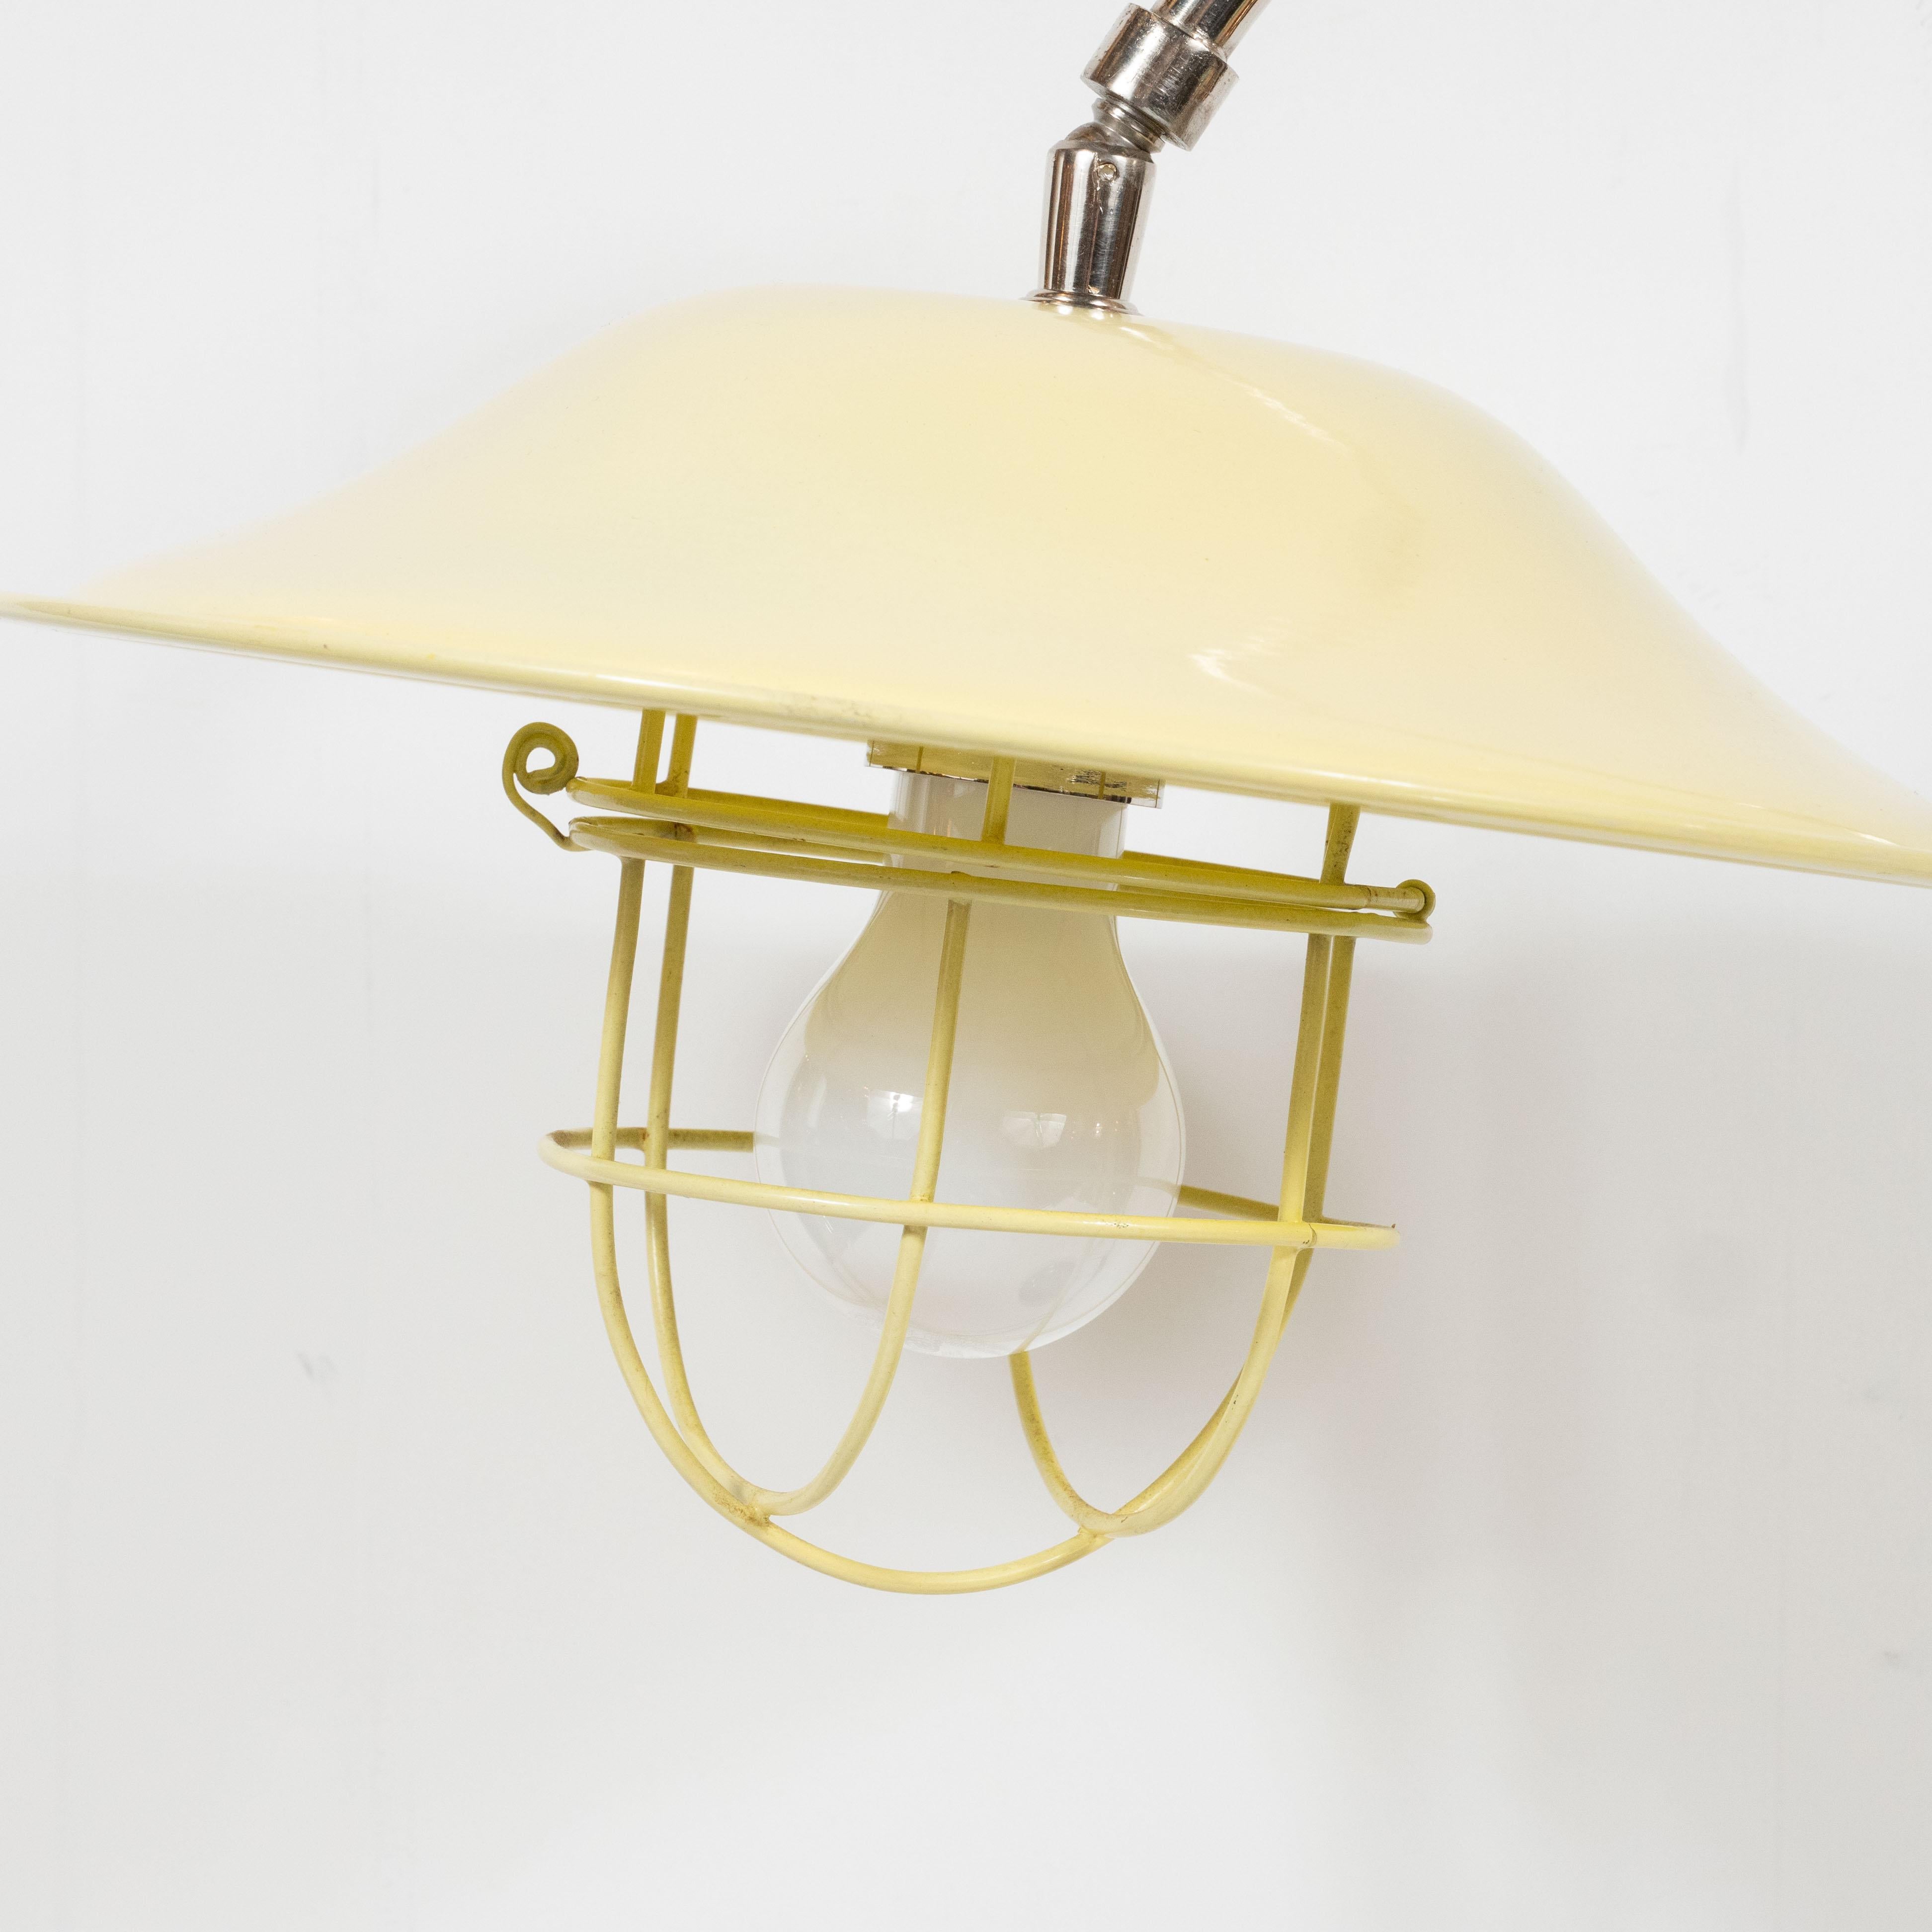 French Mid-Century Modern Chrome and Lemon Cream and Black Enamel Table Lamp For Sale 5